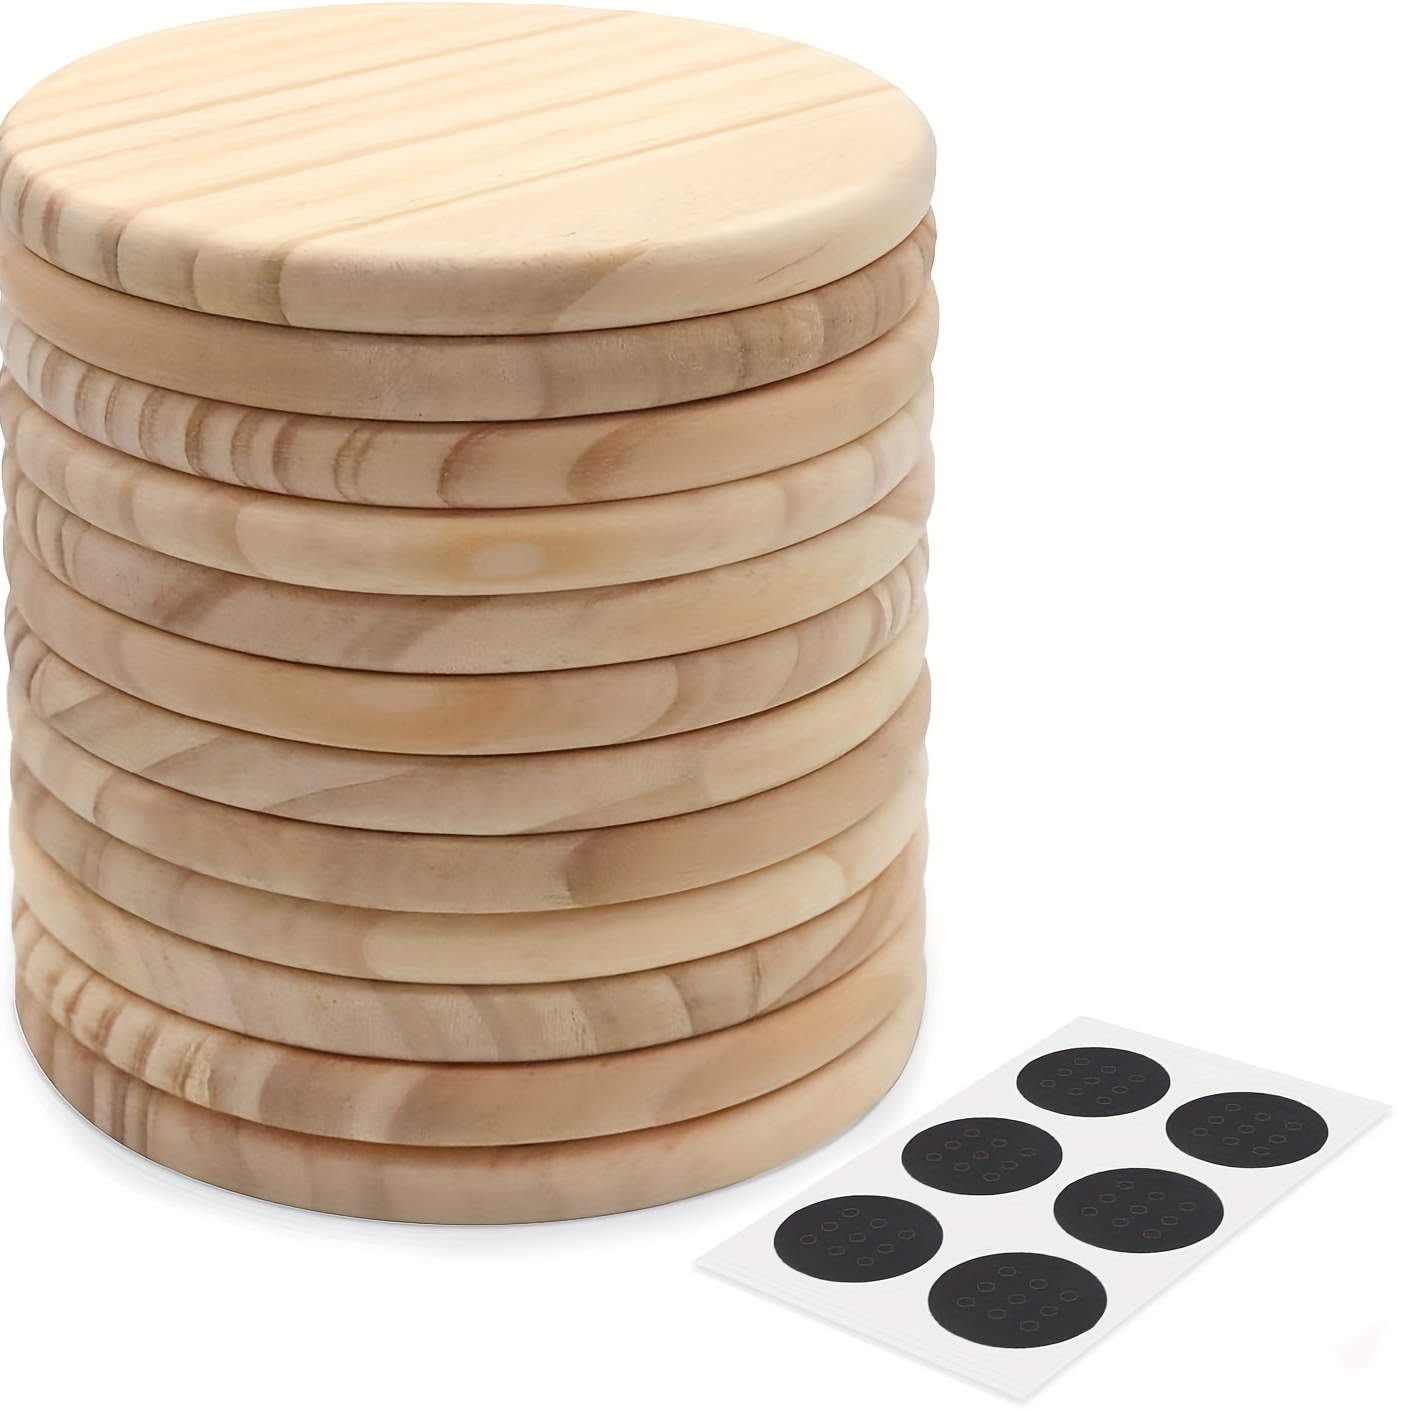 

5pcs Round Wooden Coasters, 4-inch Blank Wooden Coasters Crafts, Home Decor